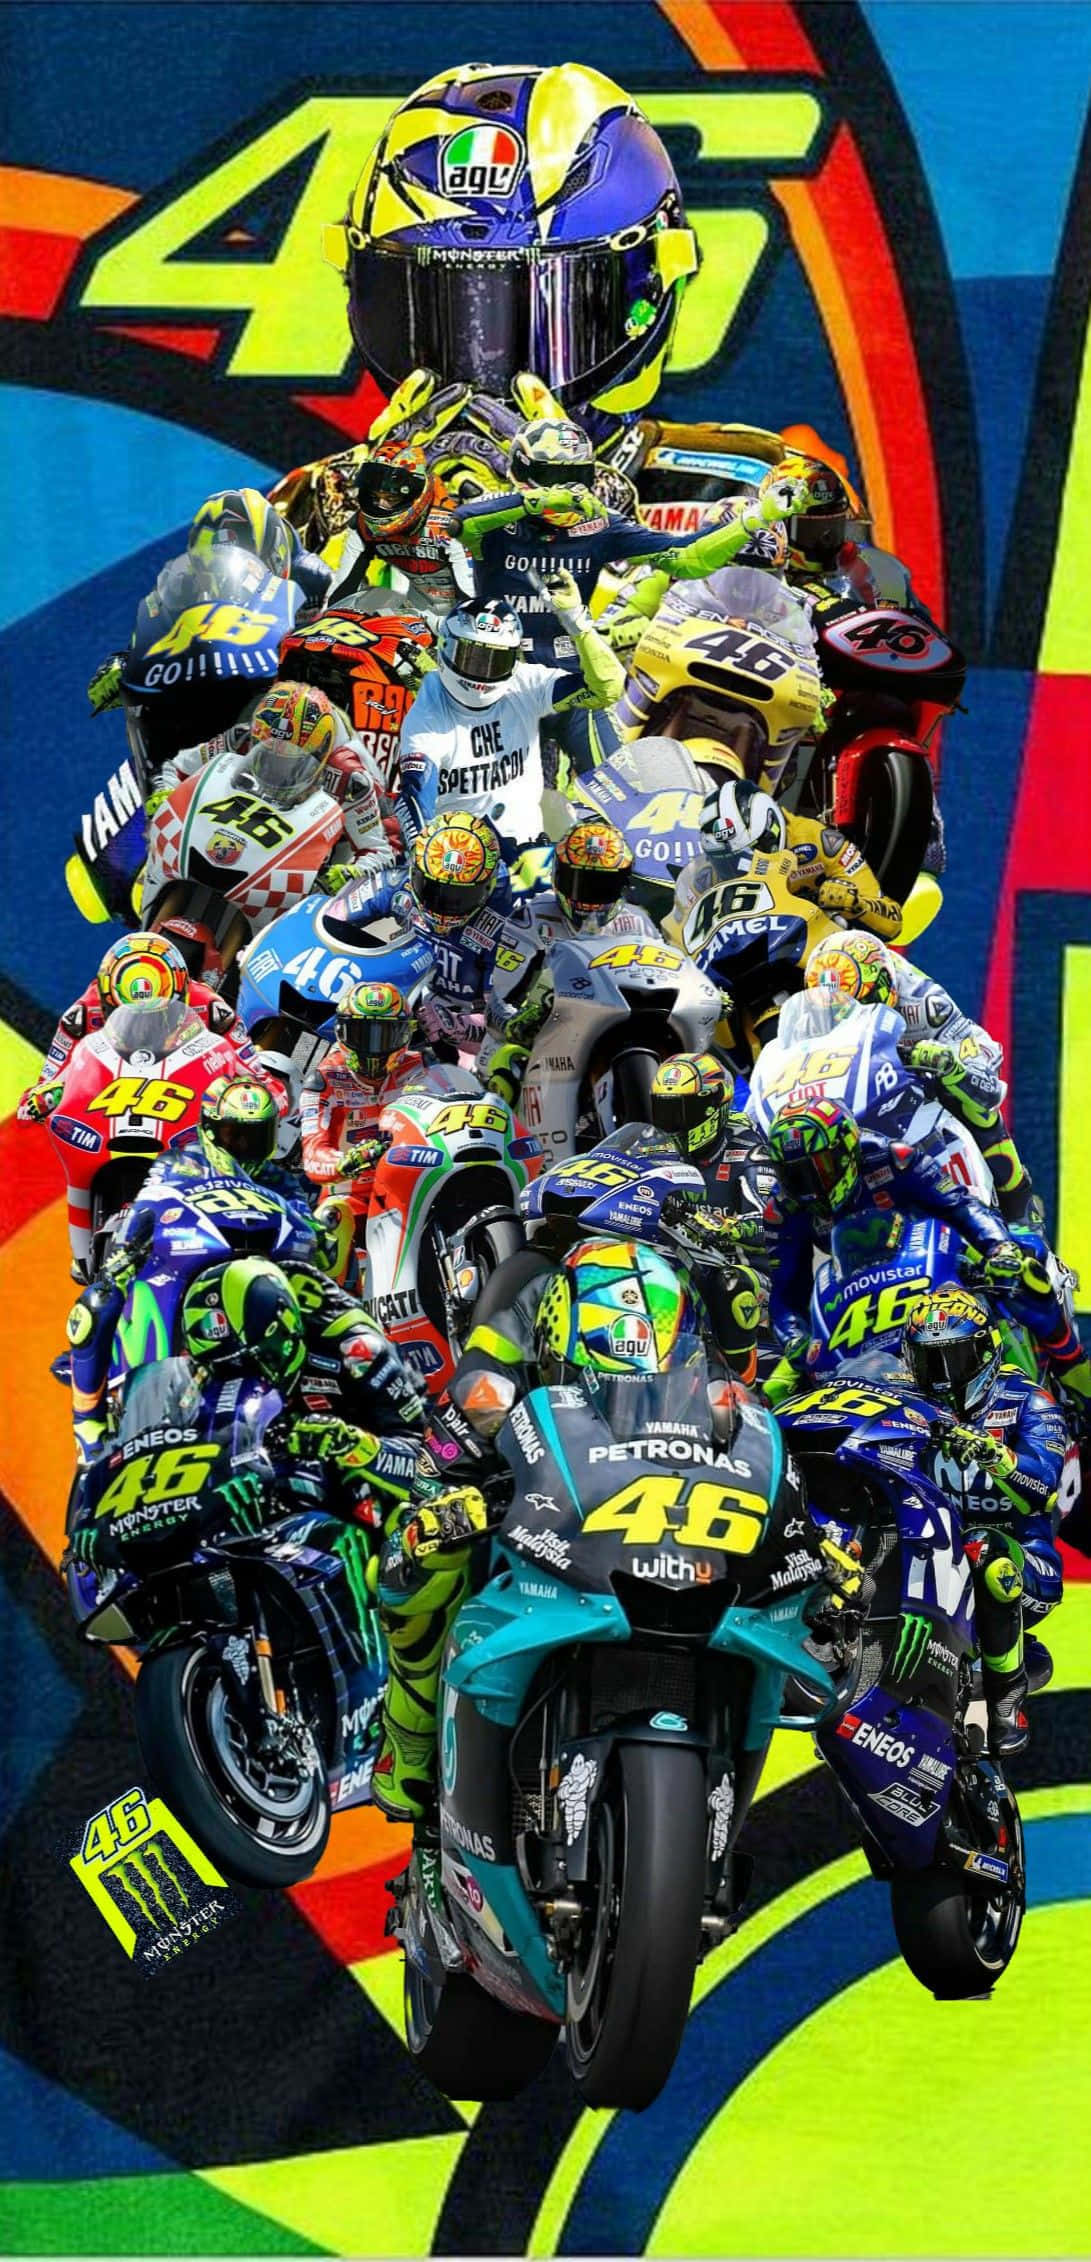 Download Vr46 Colorful Motorcycle Poster Wallpaper | Wallpapers.com